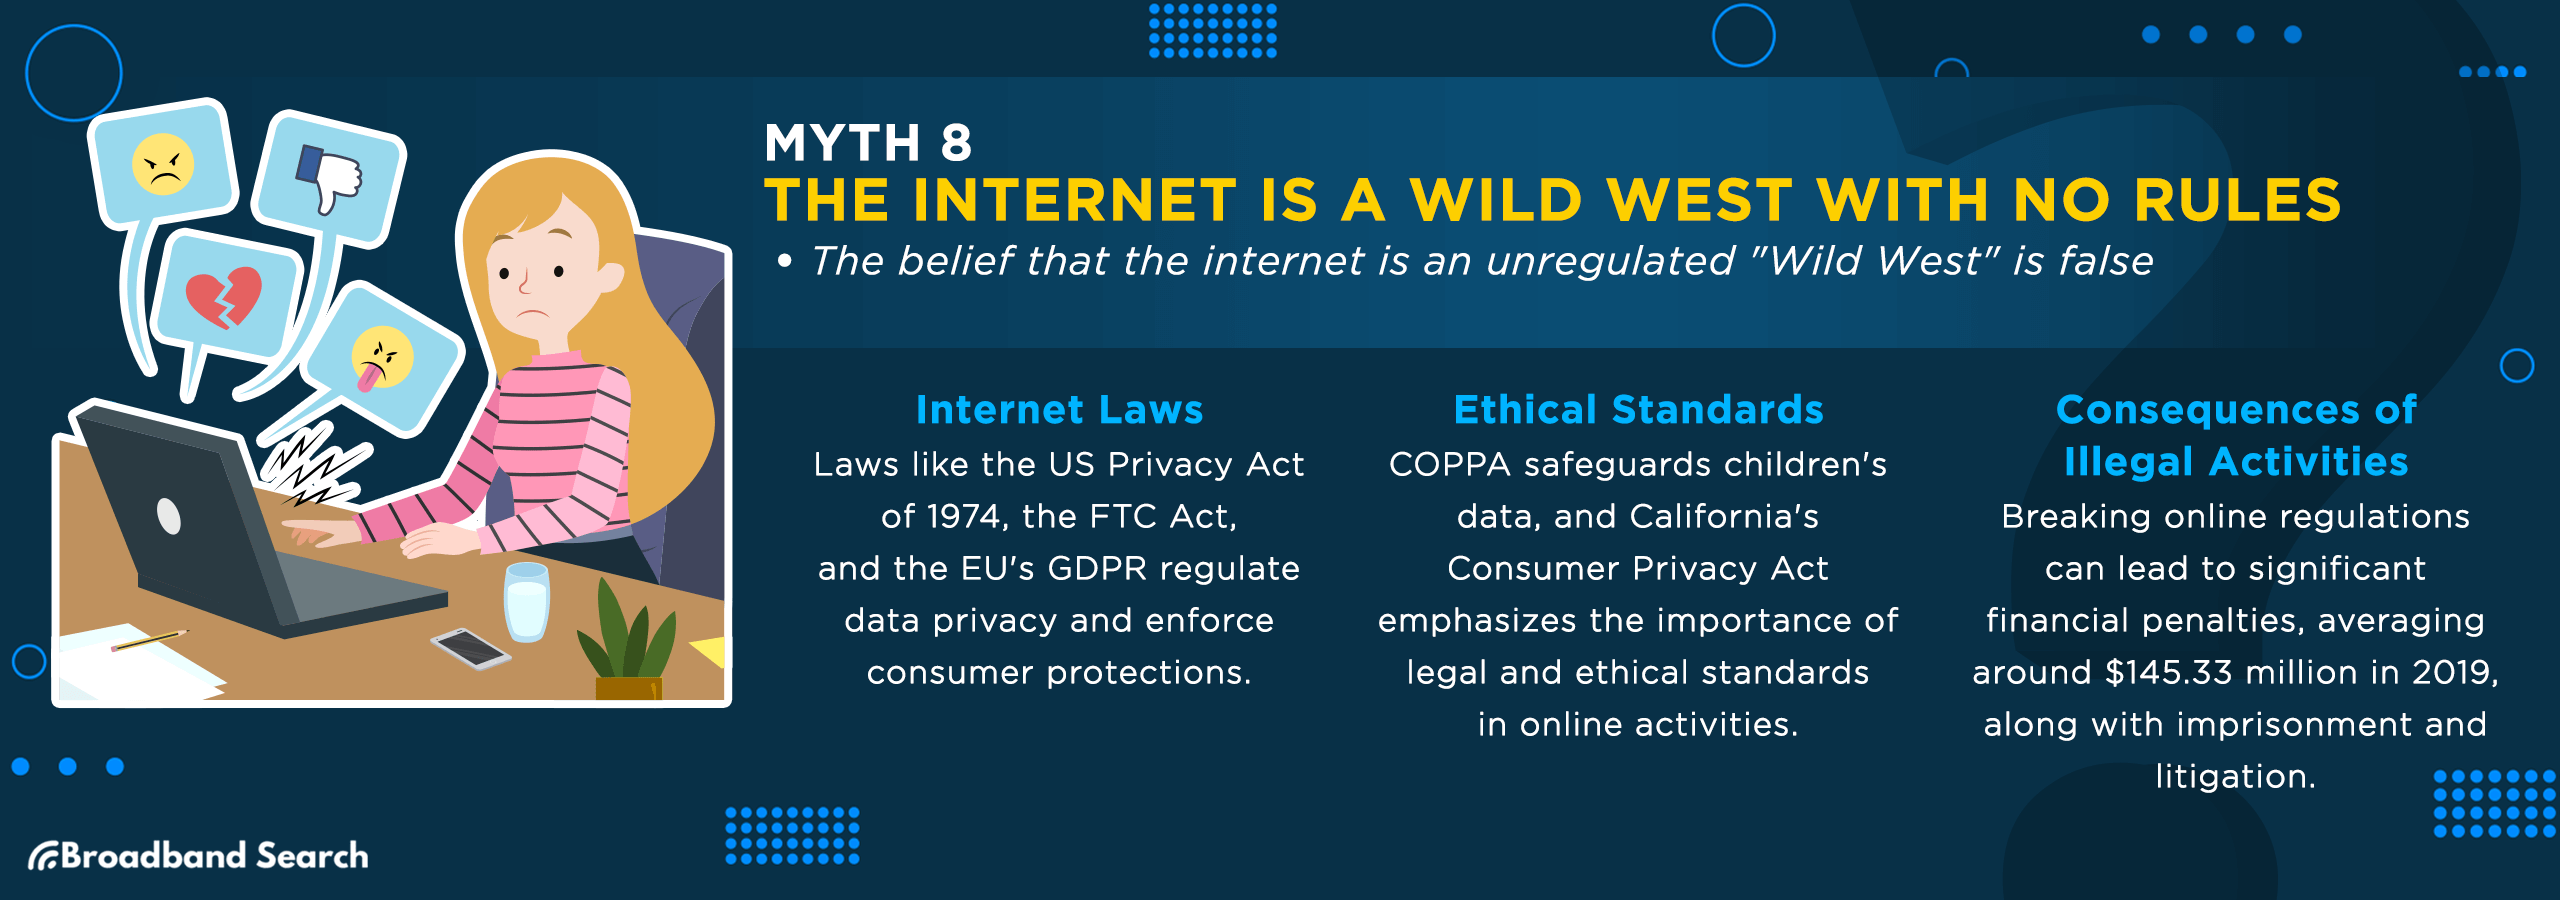 eigth internet myth, the internet is a wild west with no rules